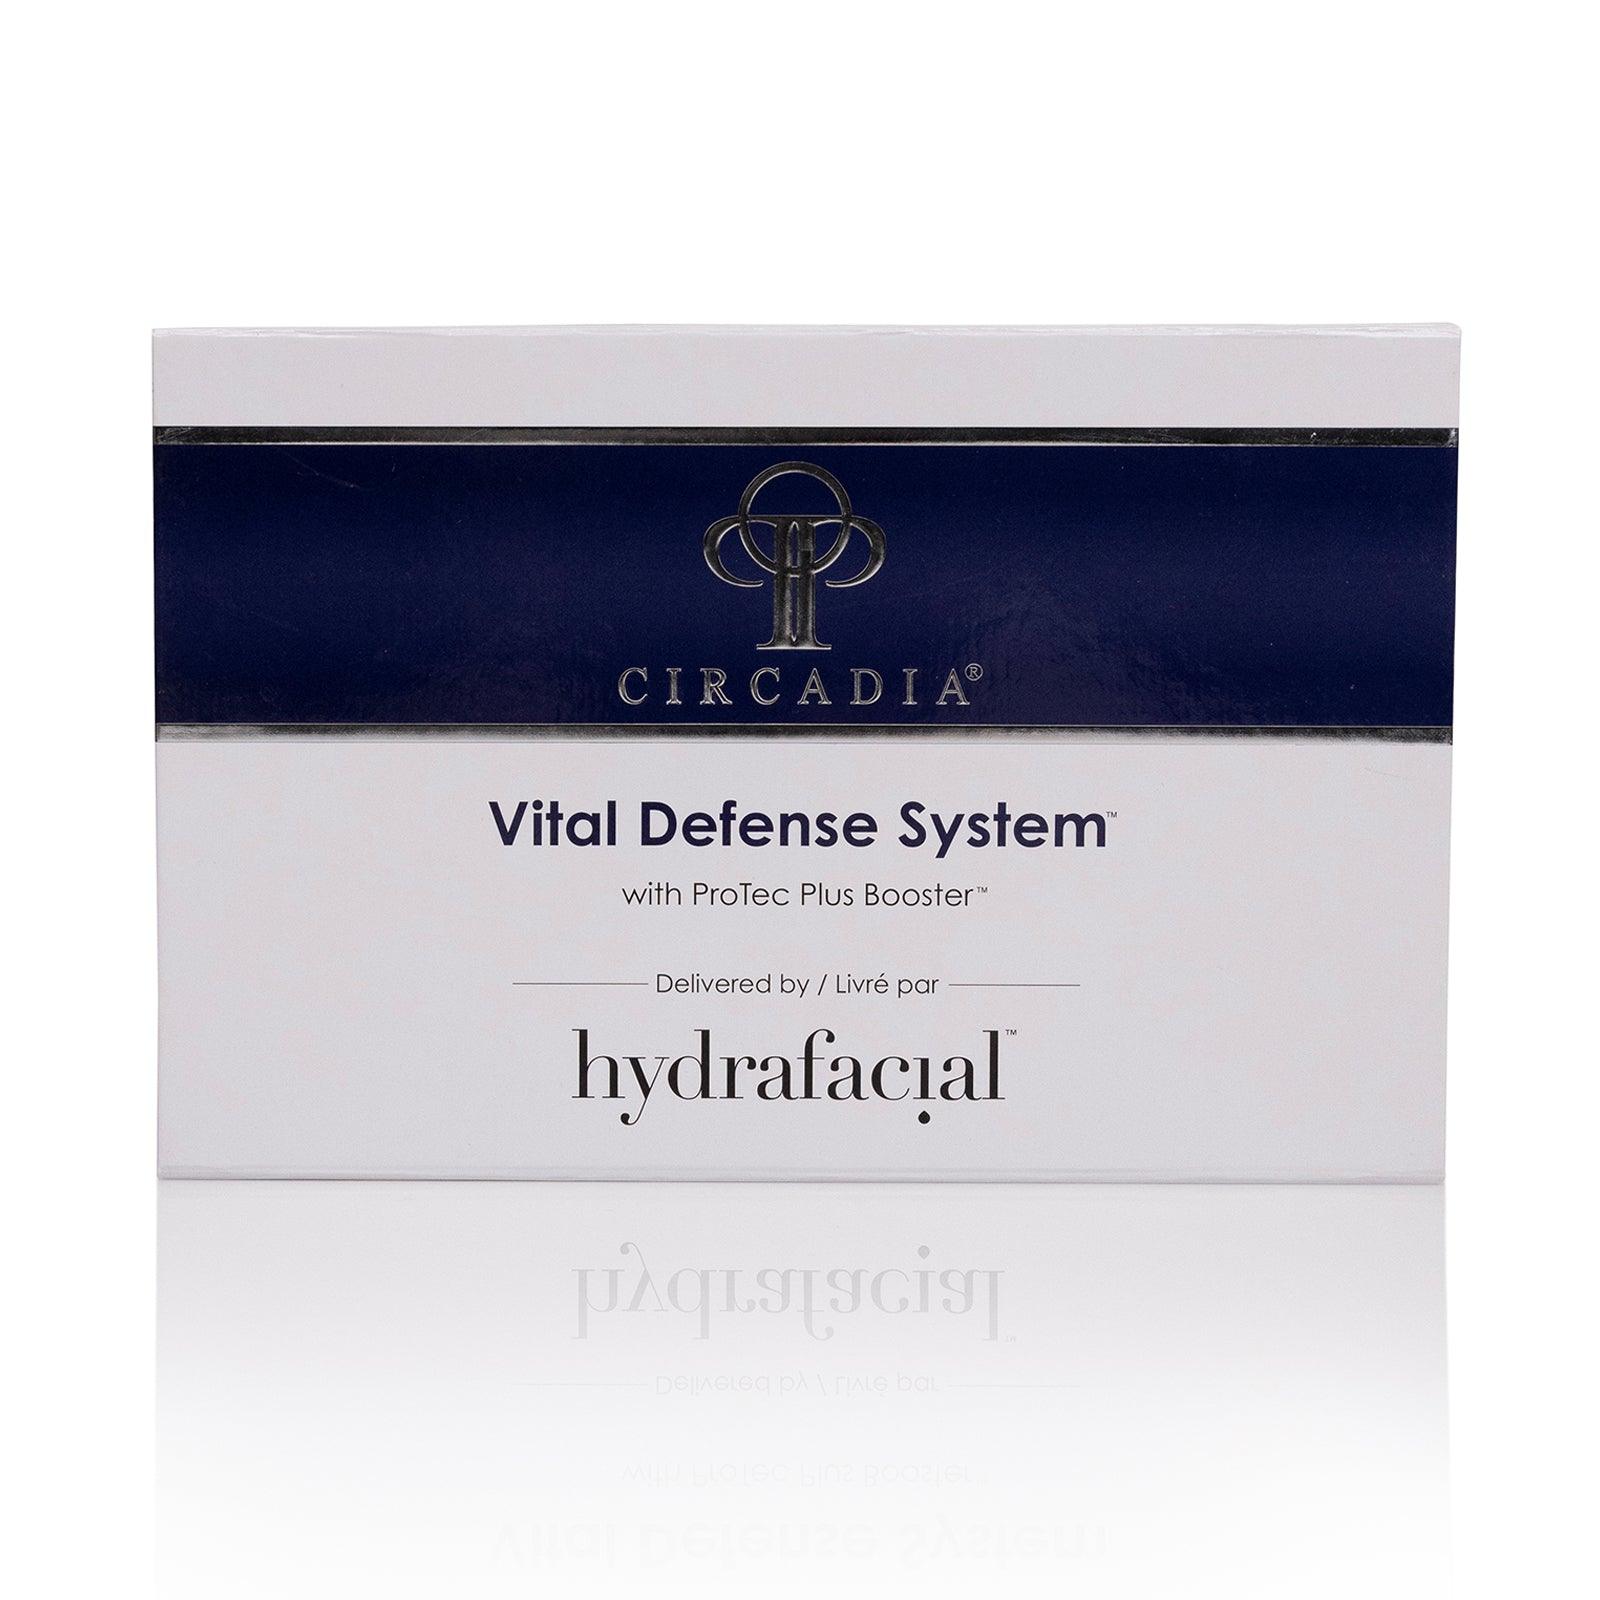 Vital Defense System with ProTec Plus Booster for HydraFacial - CIRCADIA